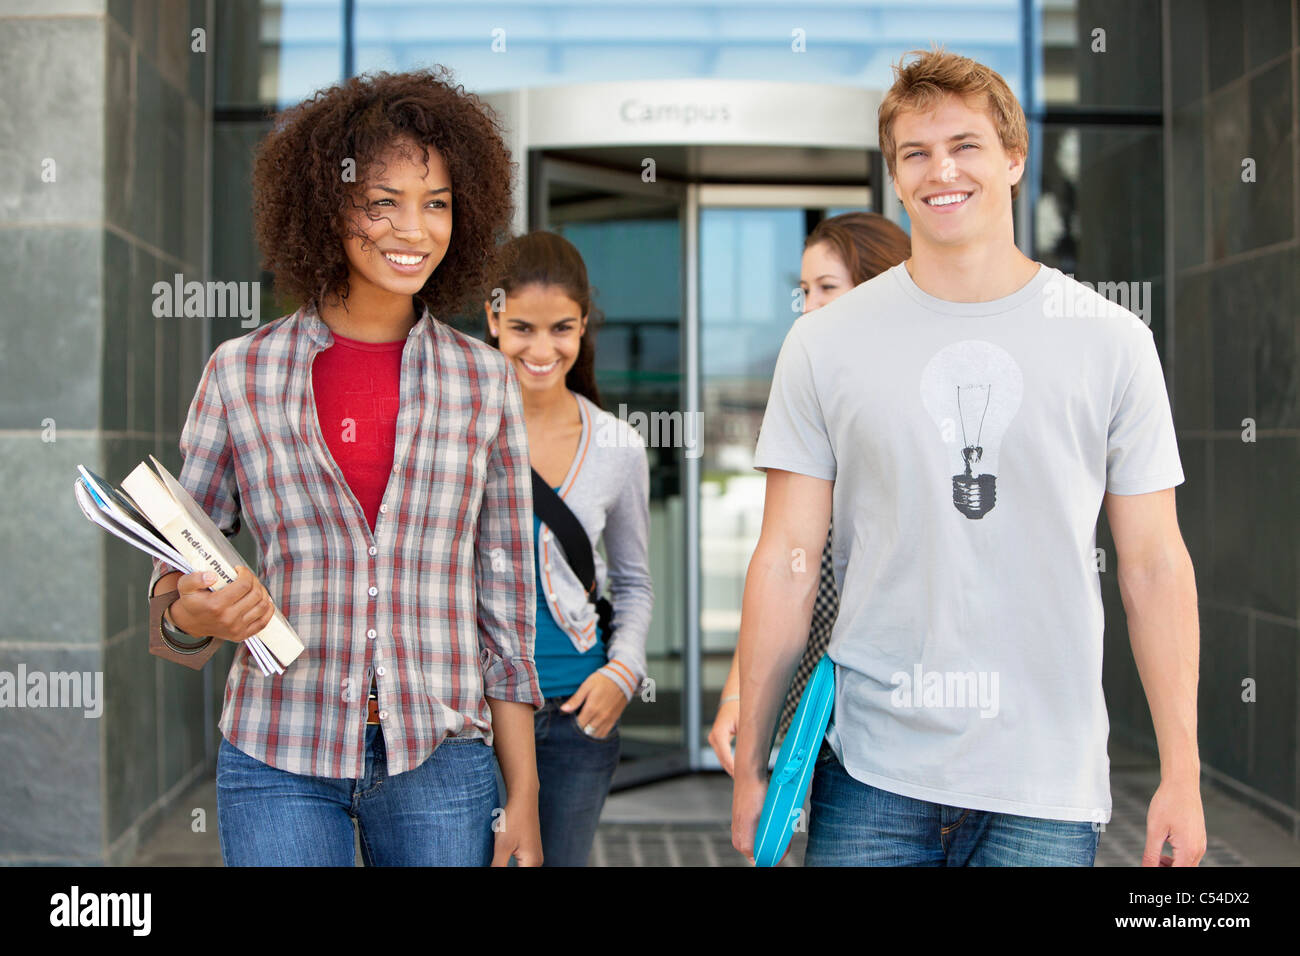 Cheerful friends in campus Stock Photo